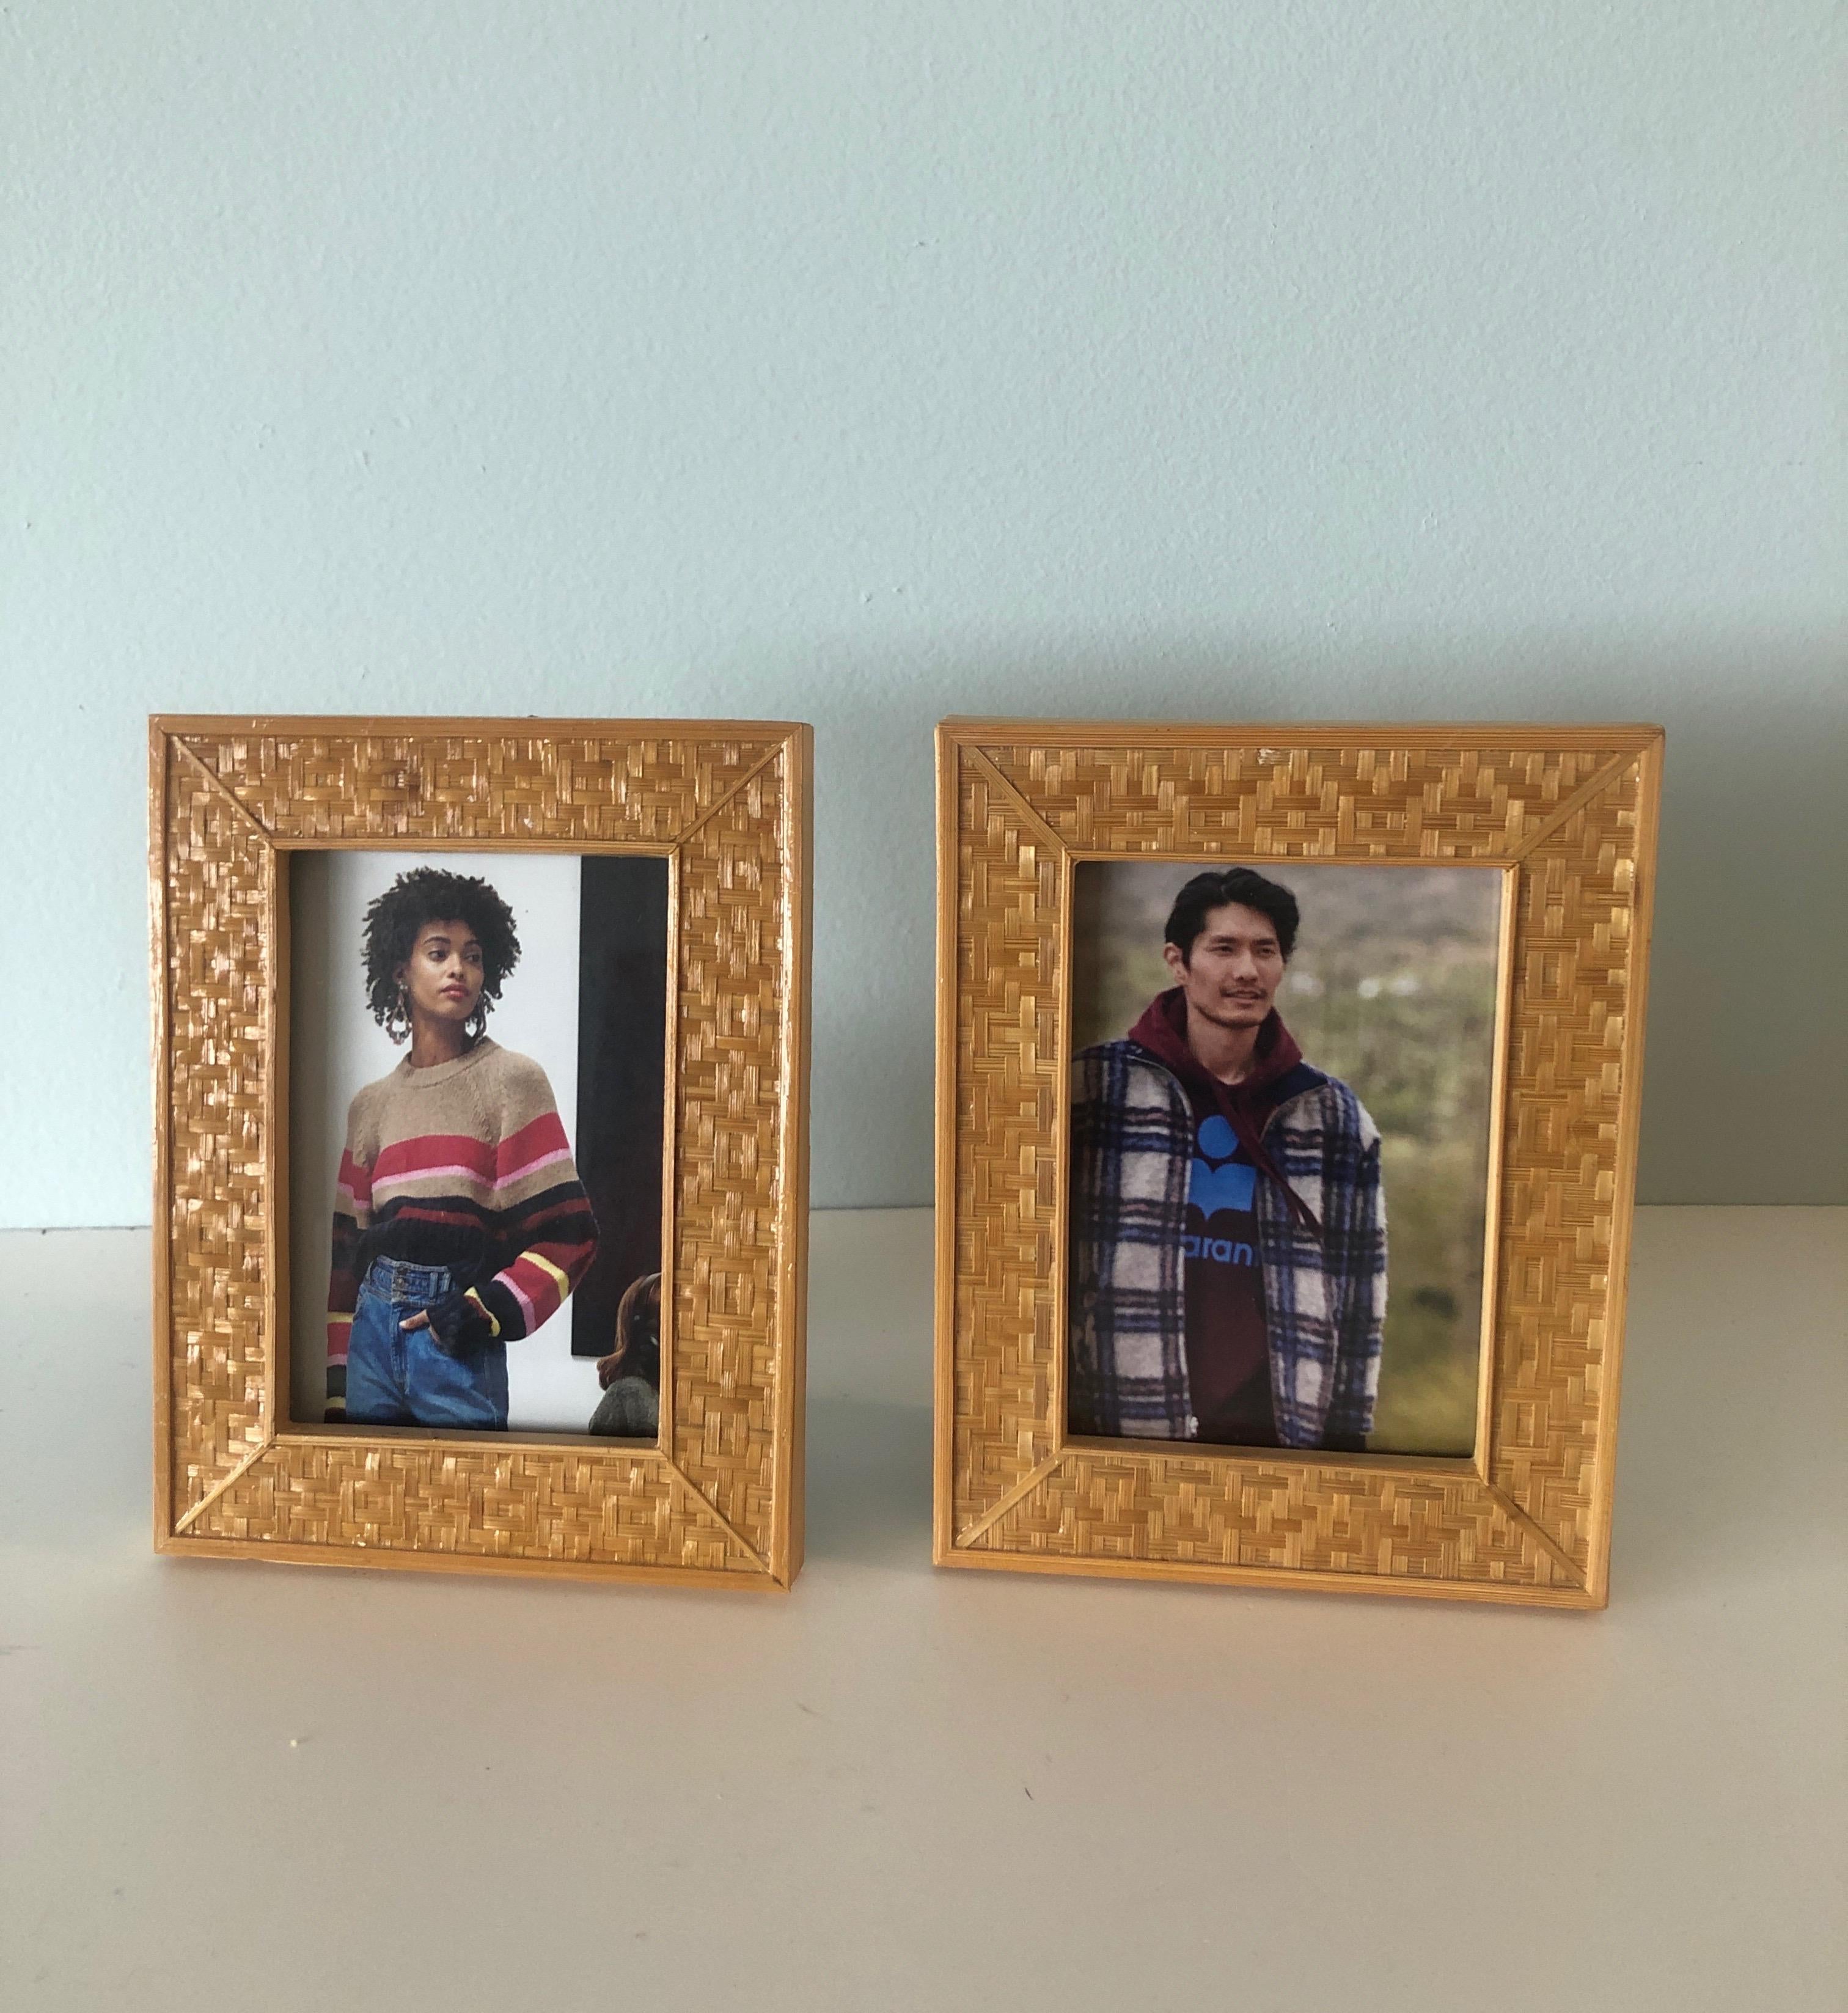 Pair of small woven bamboo decorative picture frames.
Sizes: 5